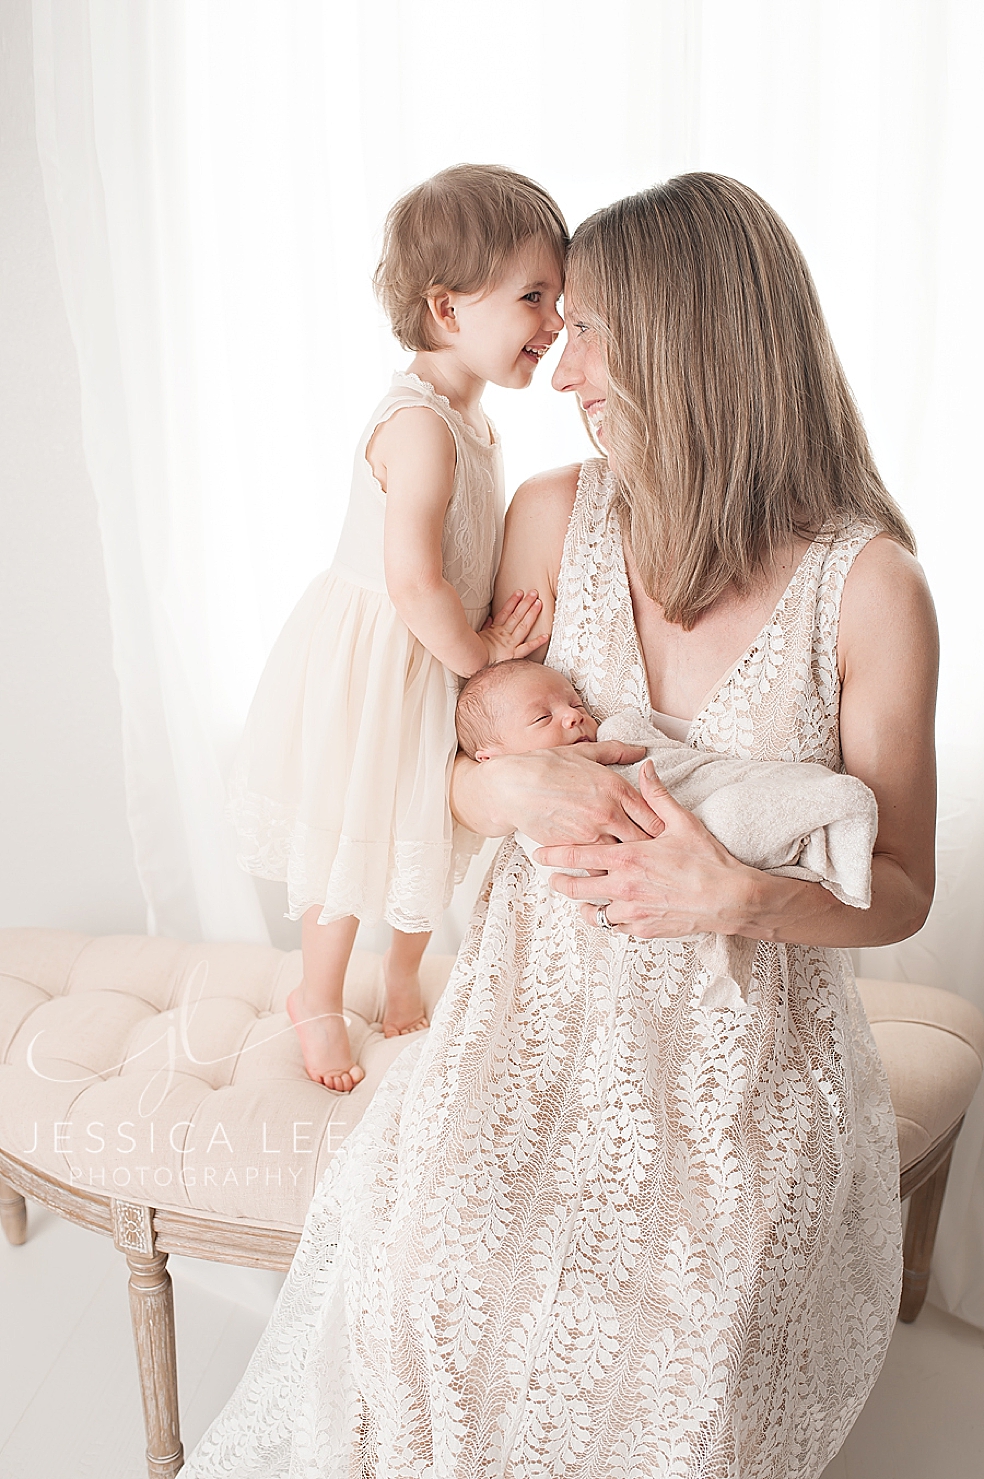 Mom in a long white dress holding her babies | Photo by Jessica Lee Photography